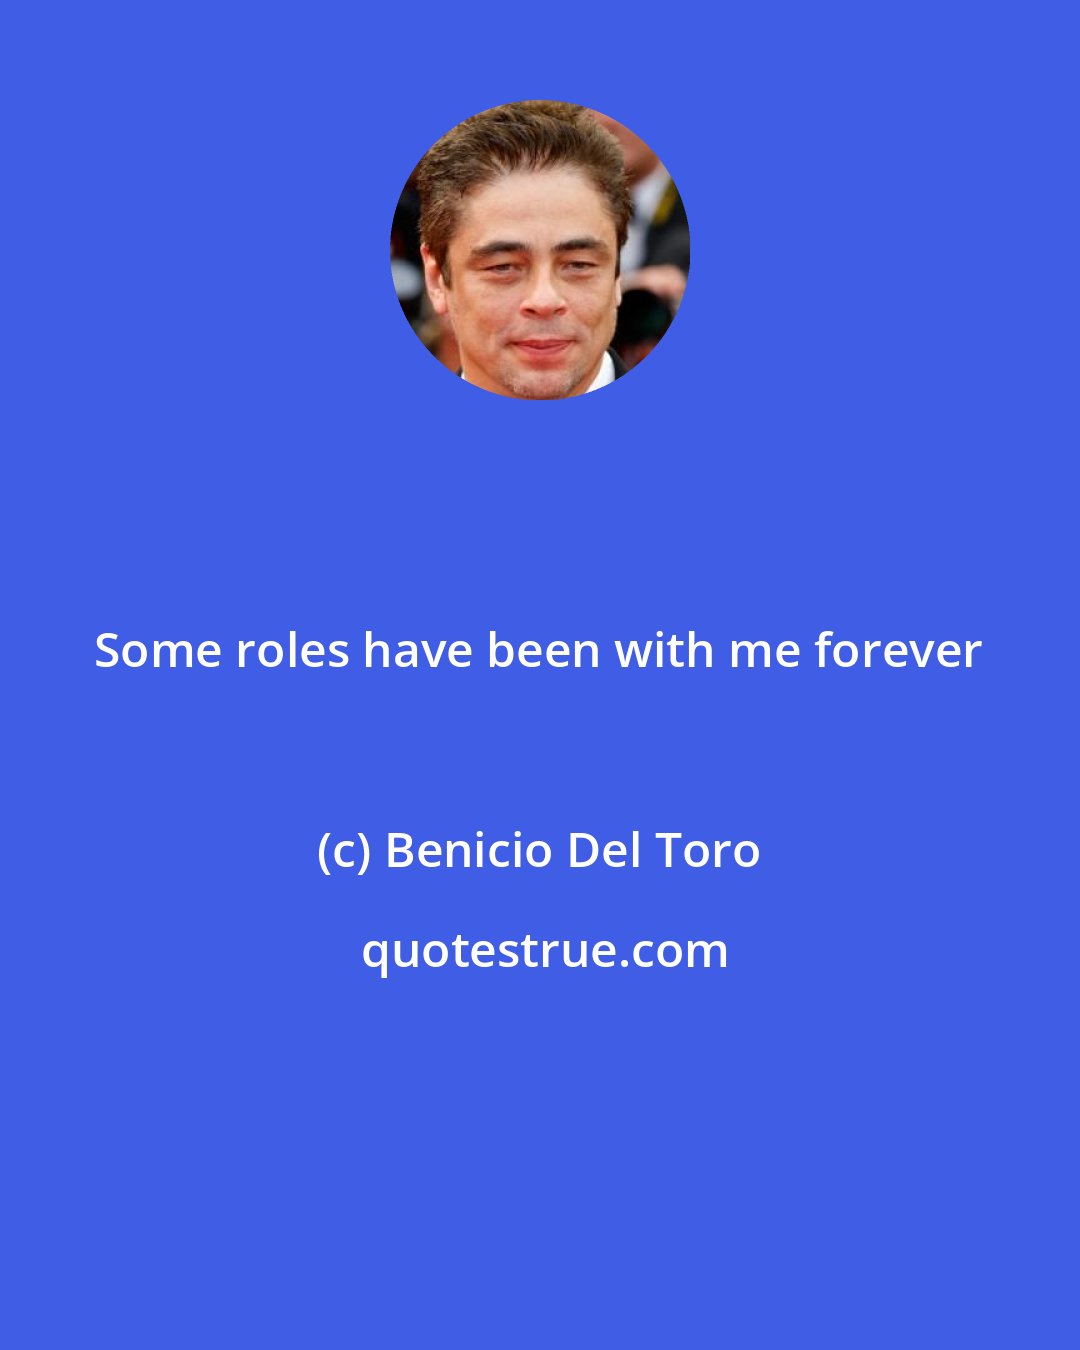 Benicio Del Toro: Some roles have been with me forever